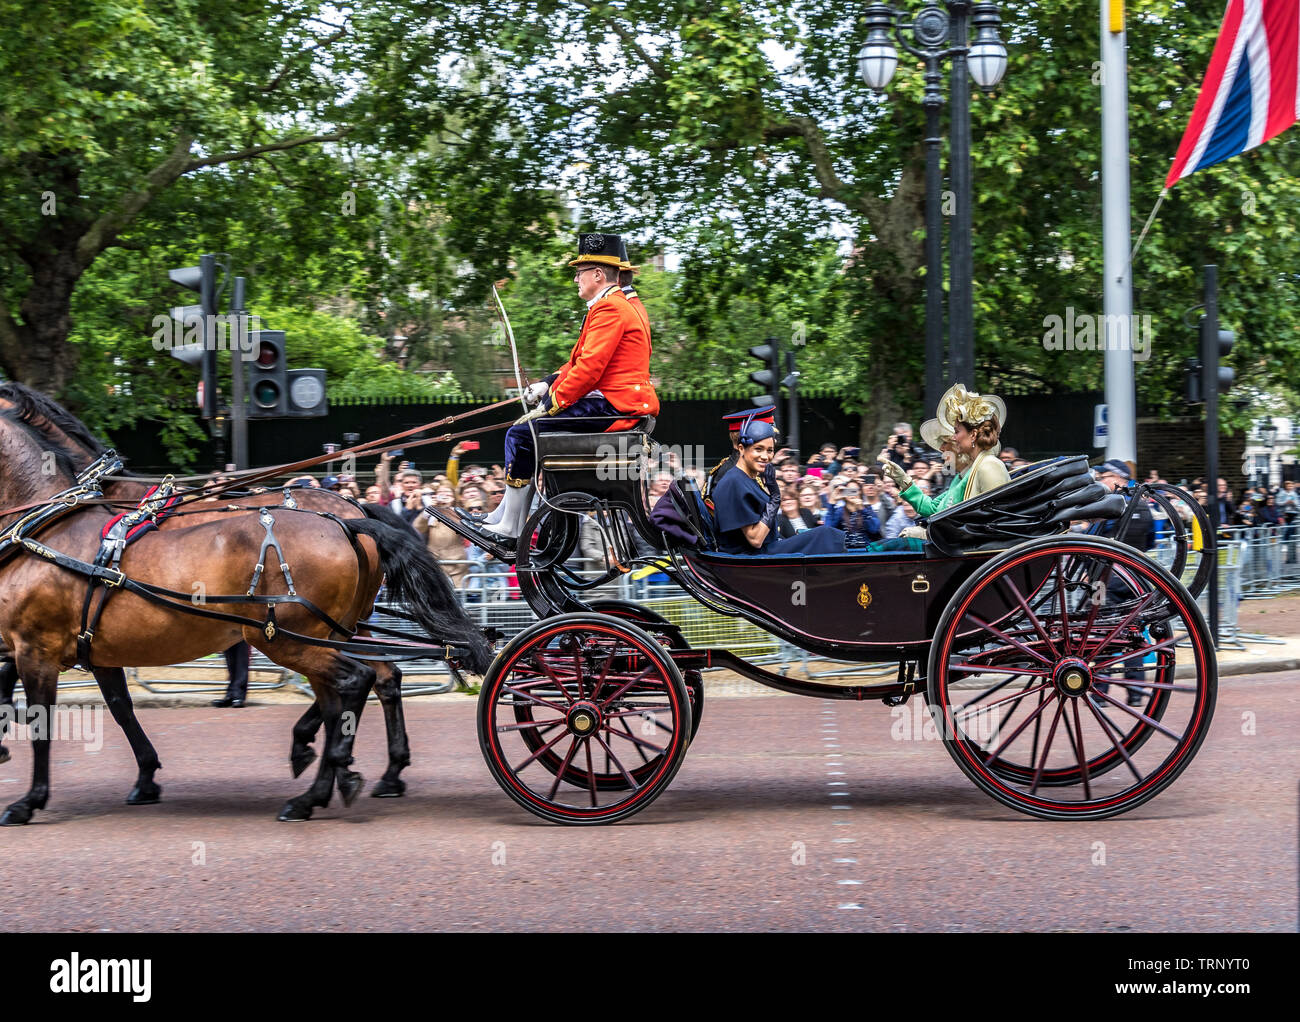 The Duchess Of Sussex rides in a carriage with The Duchess Of Cambridge Trooping The Colour , London,UK, 2019 Stock Photo